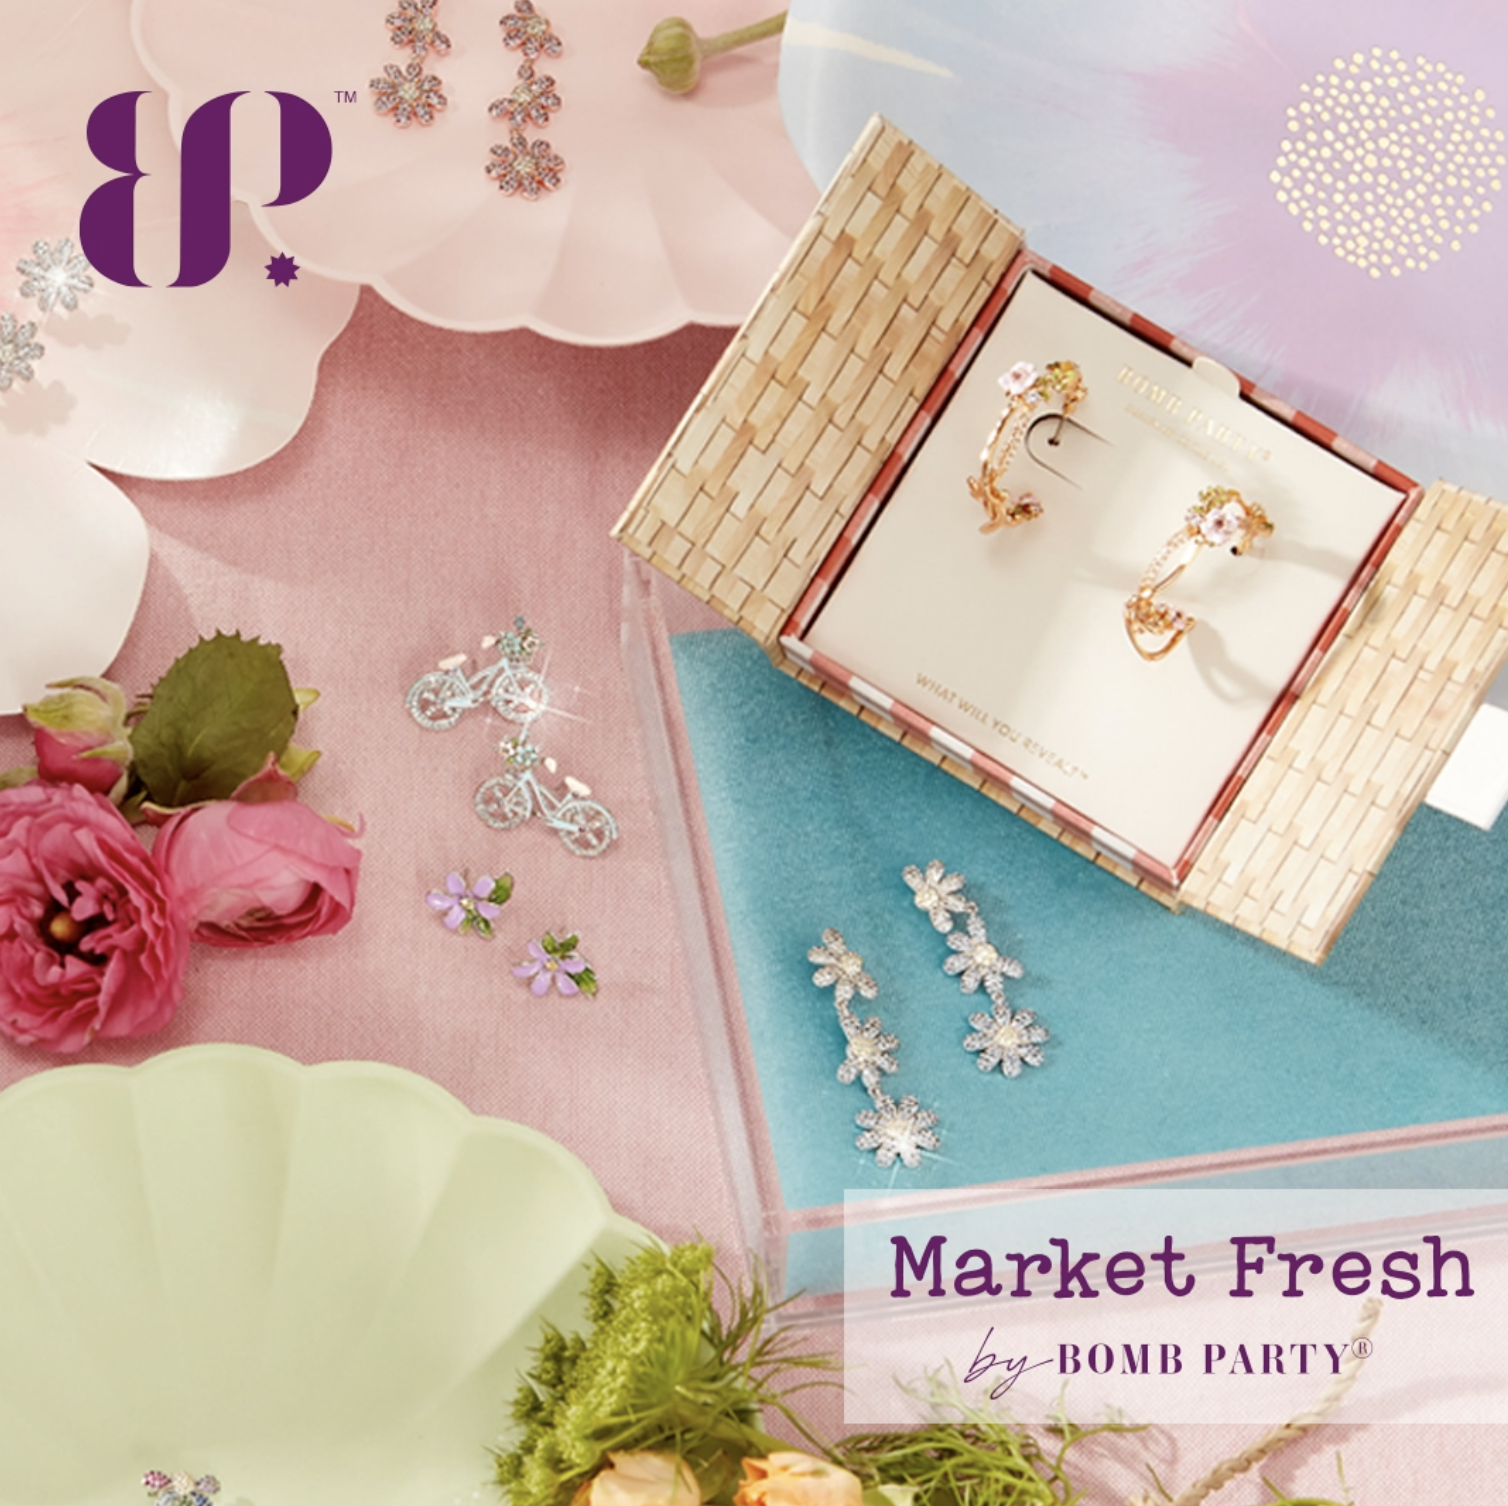 Image for Market Fresh by Bomb Party